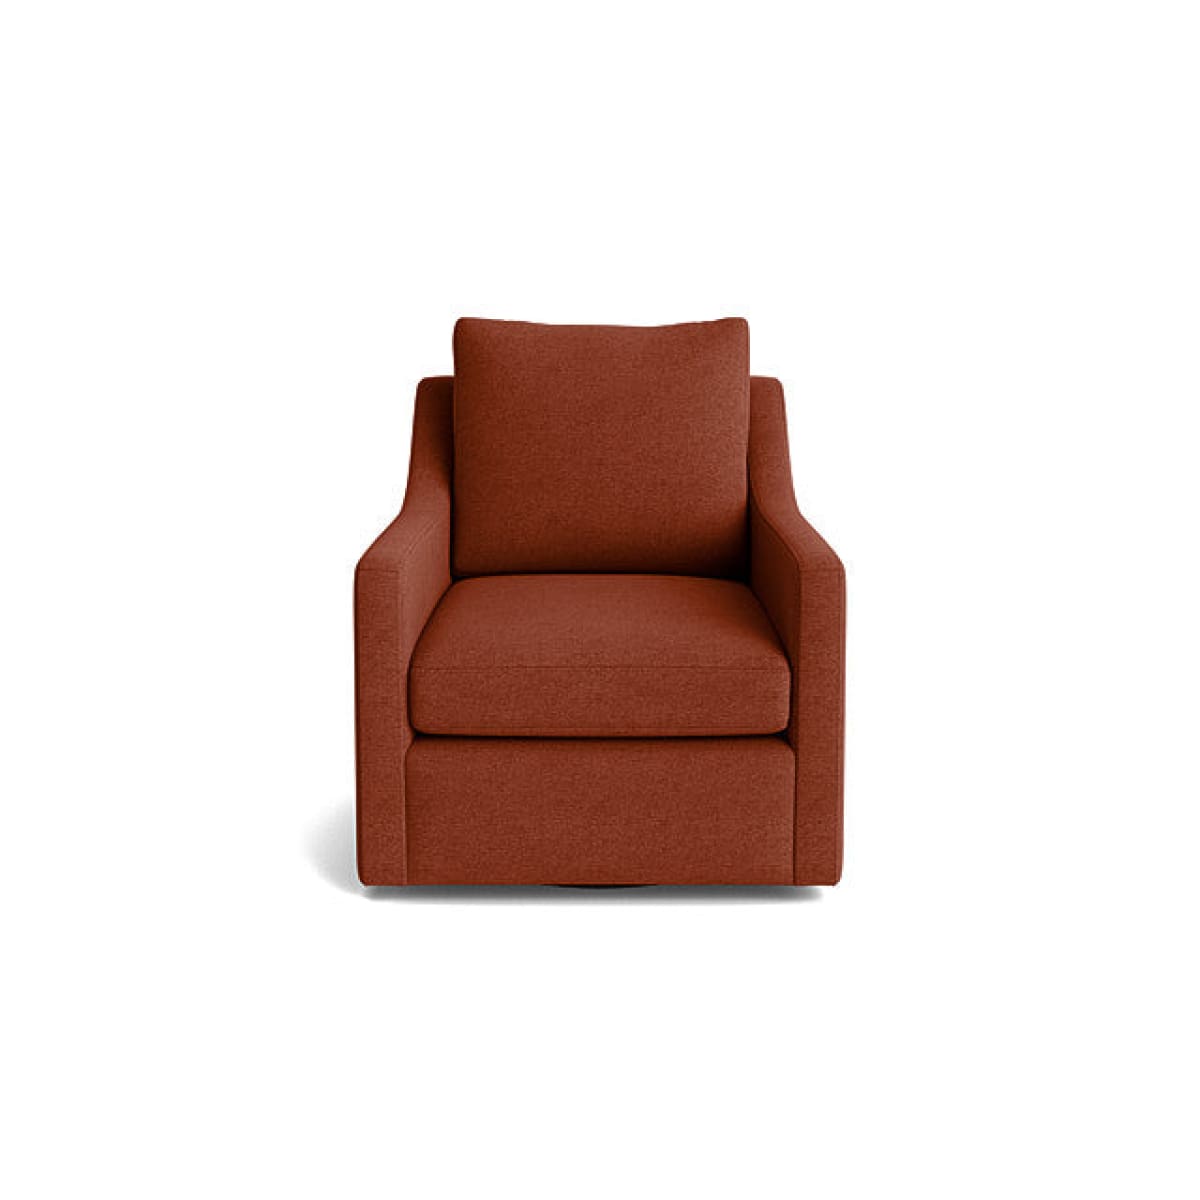 Grove Accent Chair - Entice Spice